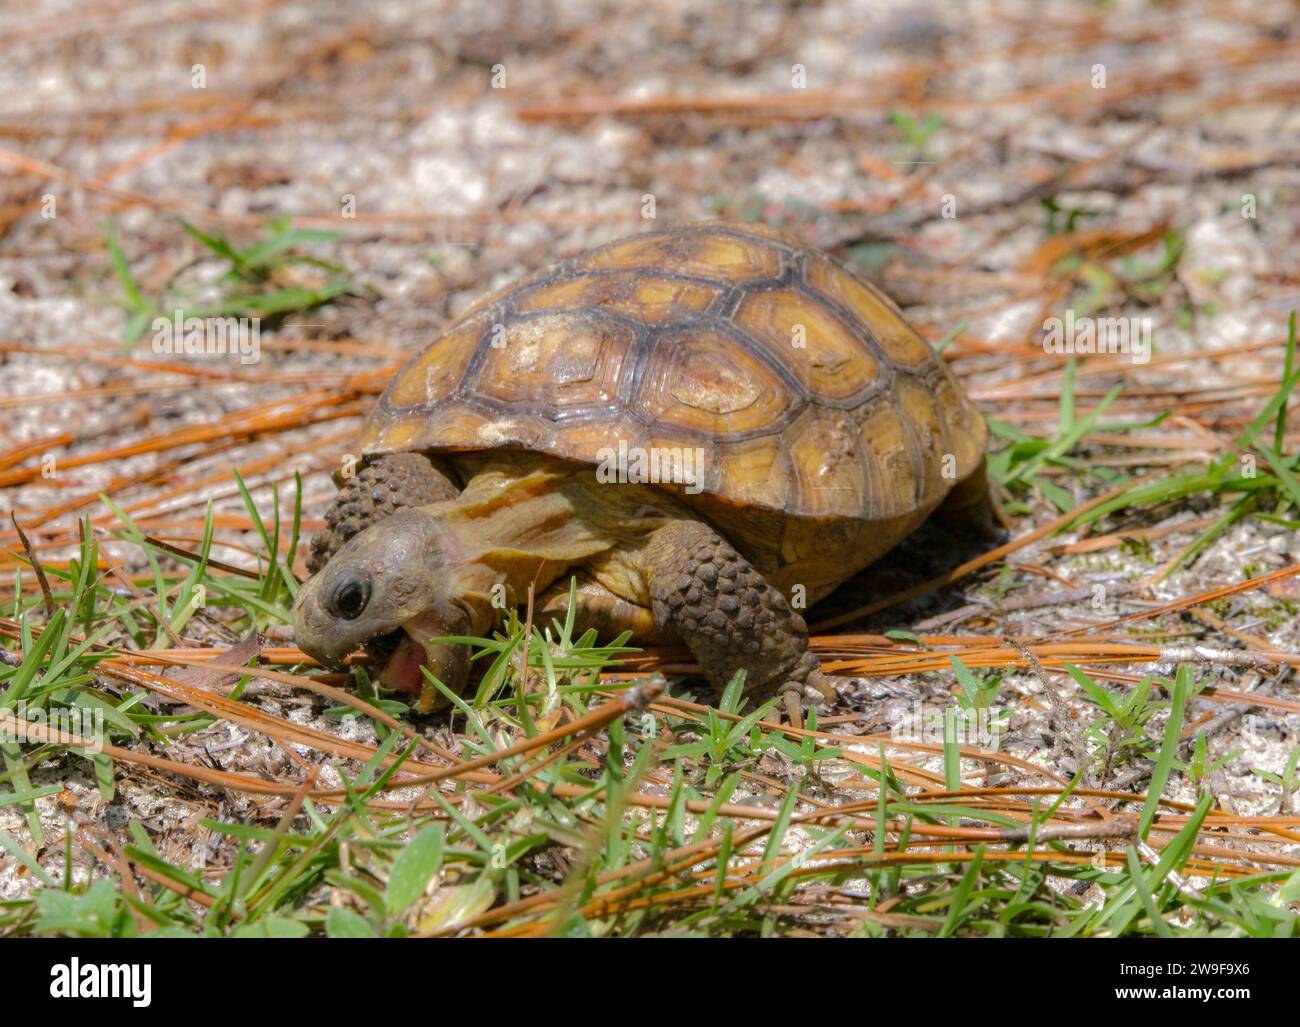 Baby Florida Gopher Tortoise - Gopherus polyphemus - eating plants and grass in native wild Sandhill habitat.  Front view with mouth open Stock Photo